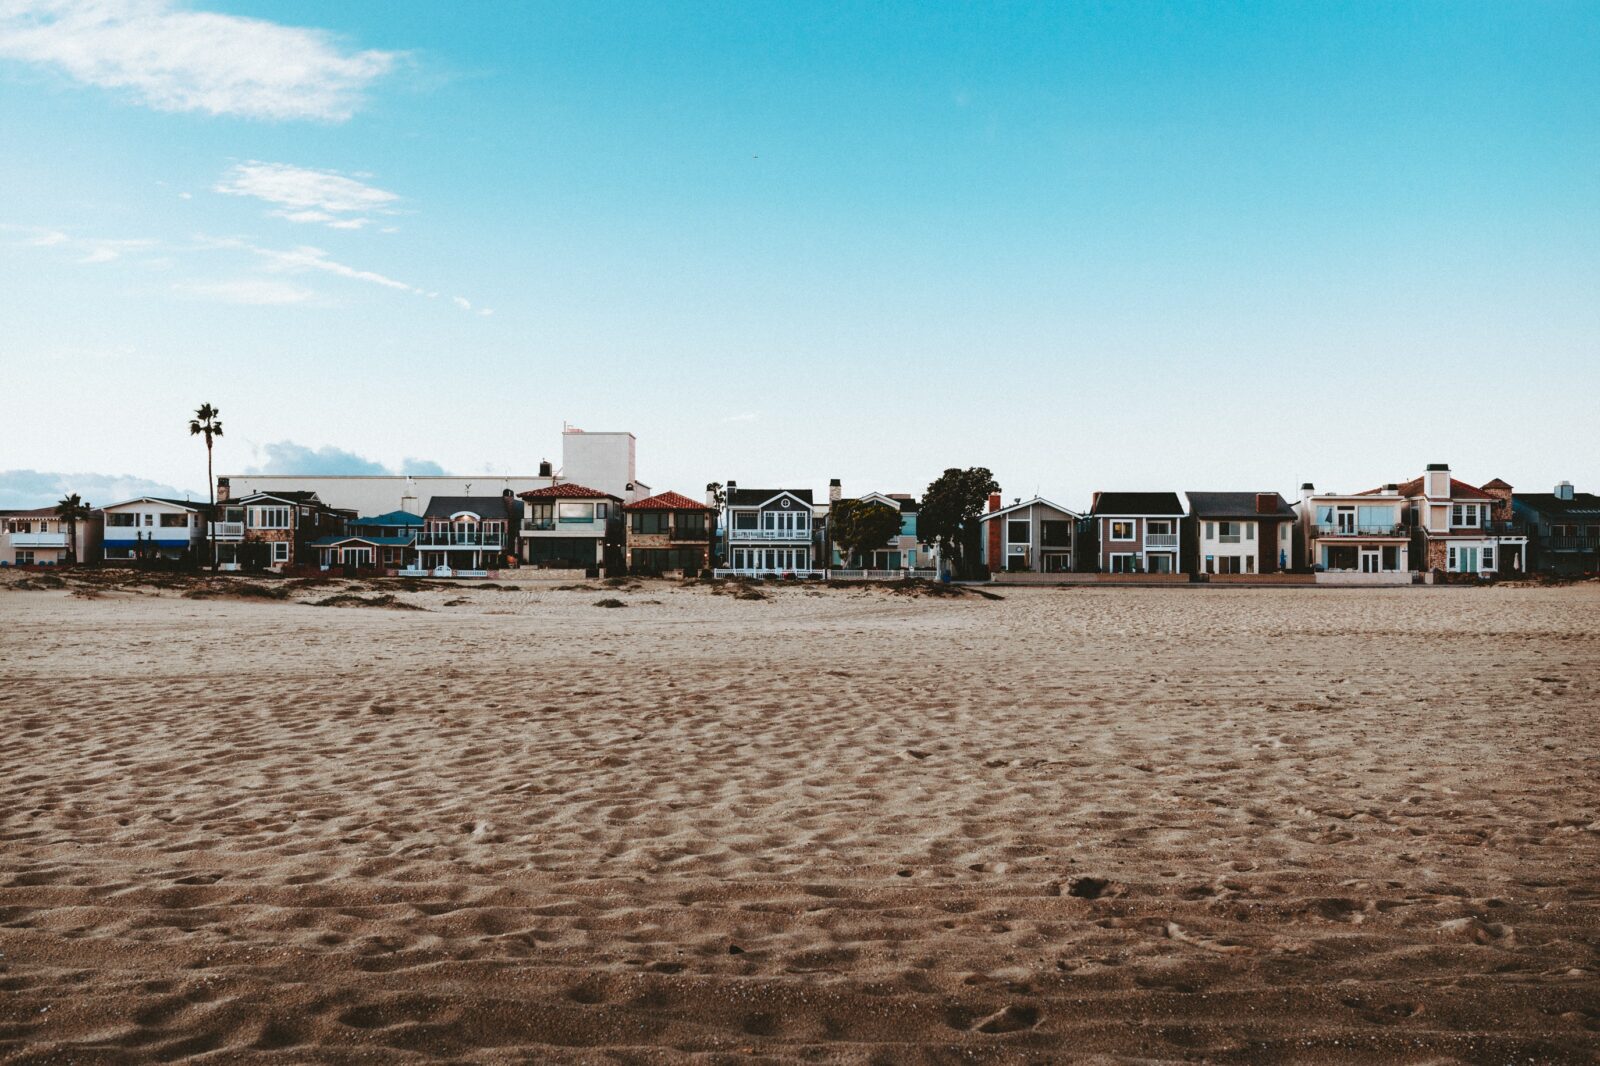 Image of beach houses from the view of someone walking on the shore